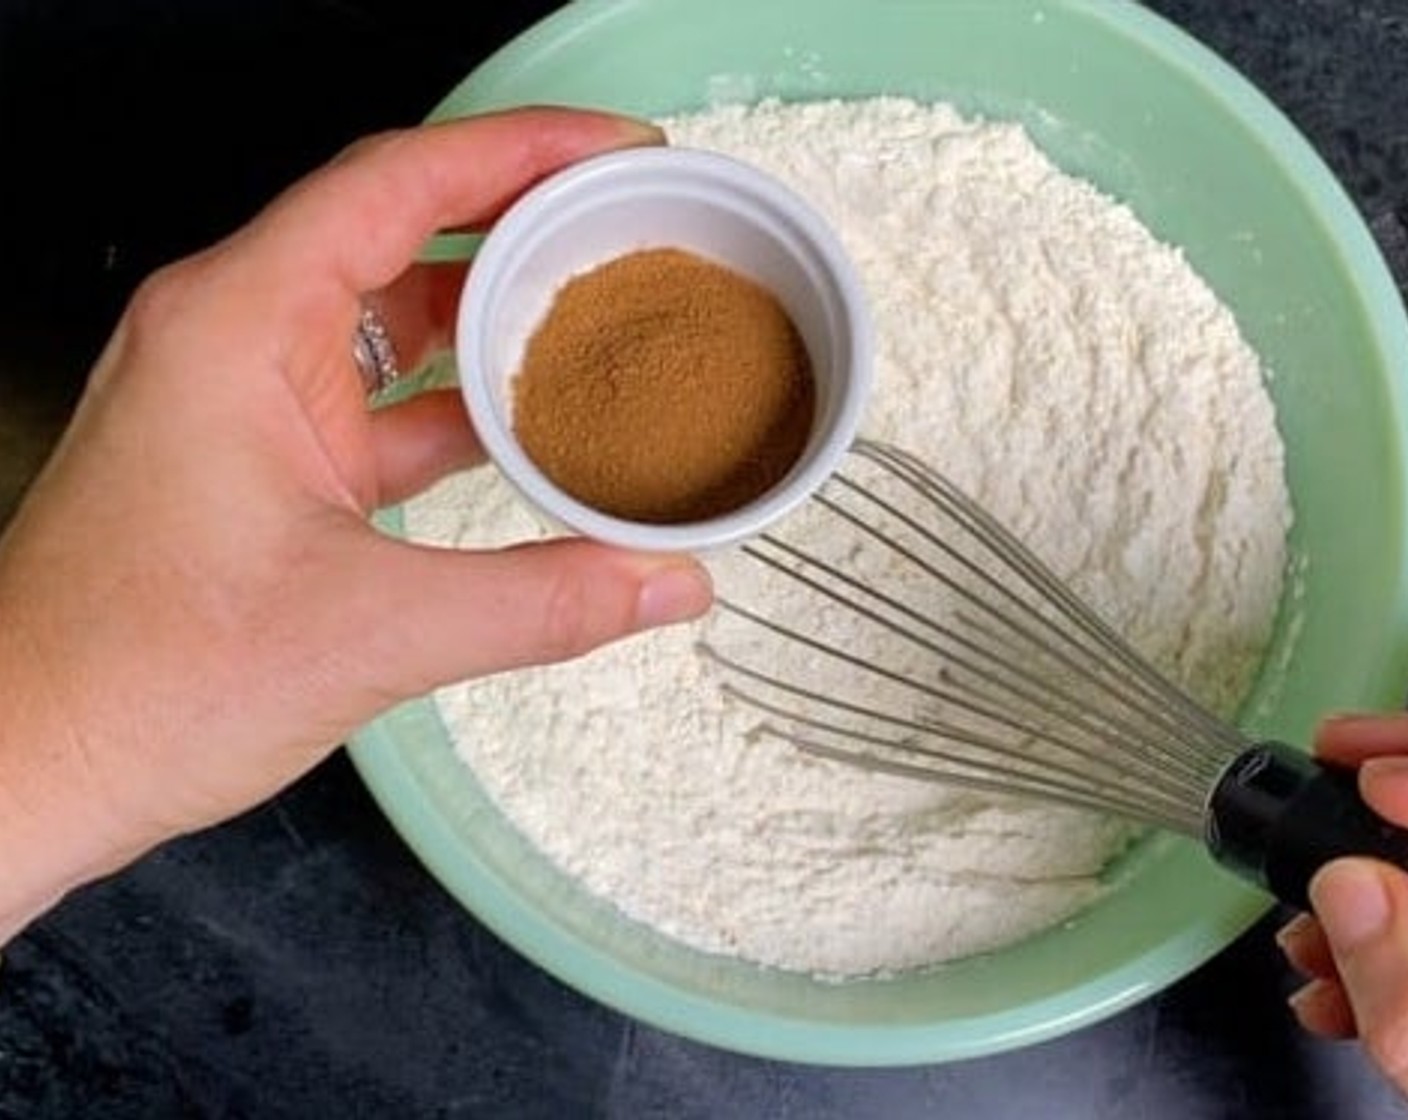 step 2 In a large mixing bowl, combine the All-Purpose Flour (2 3/4 cups), Corn Starch (1/2 Tbsp), Salt (1/2 tsp), Baking Soda (1 tsp), and Pumpkin Pie Spice (1 Tbsp) and then set aside.